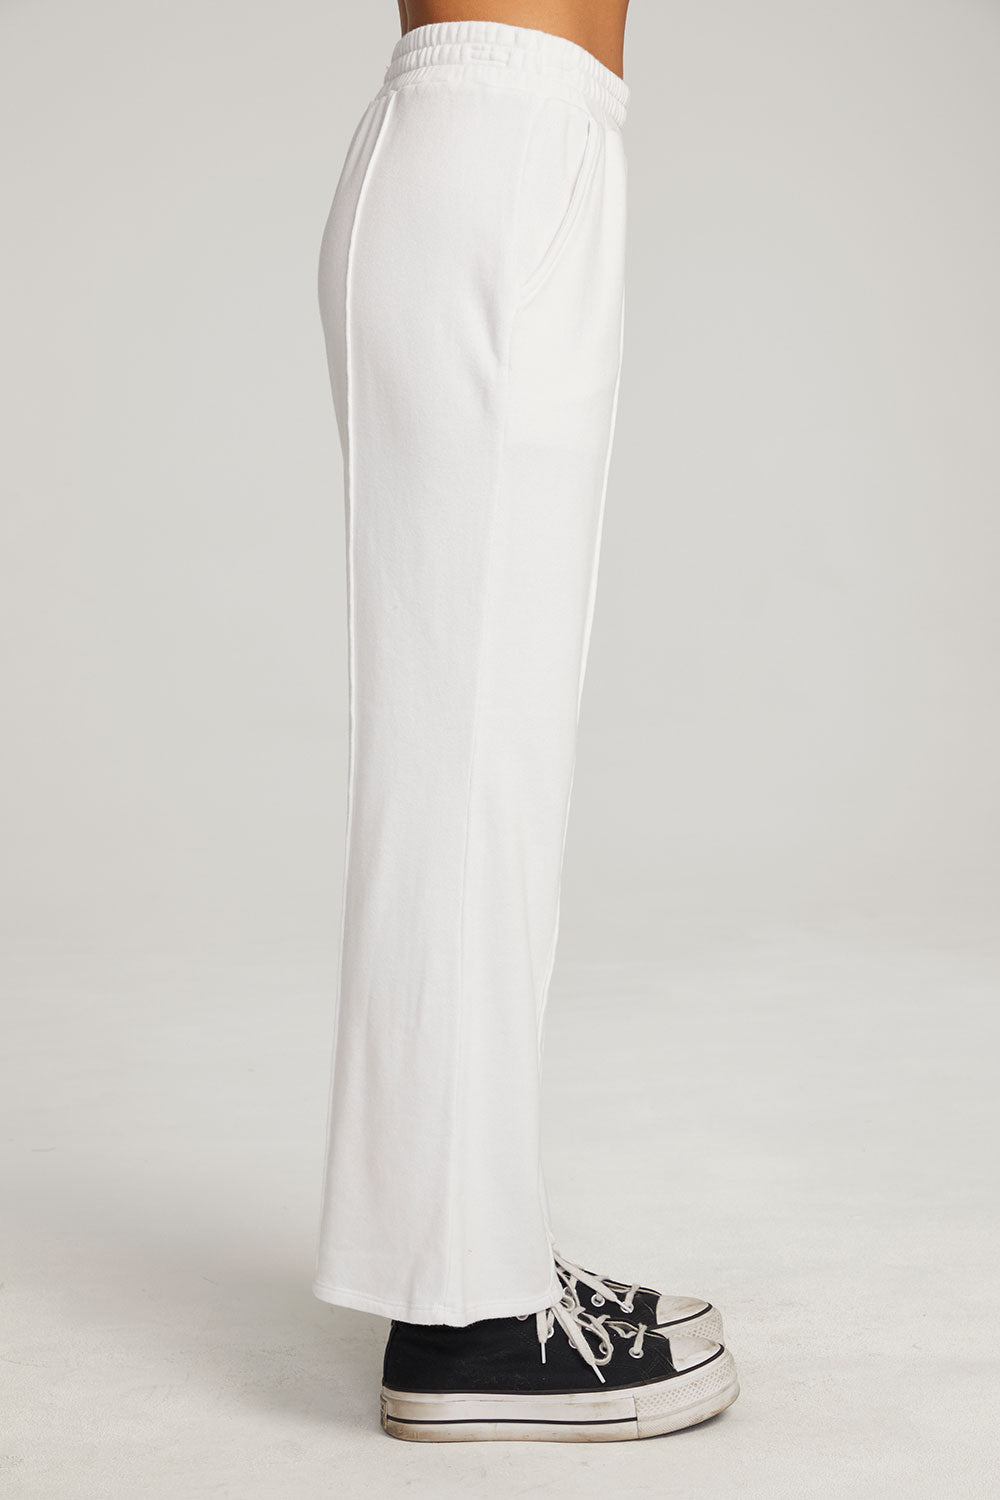 Amarillo White Trousers WOMENS chaserbrand